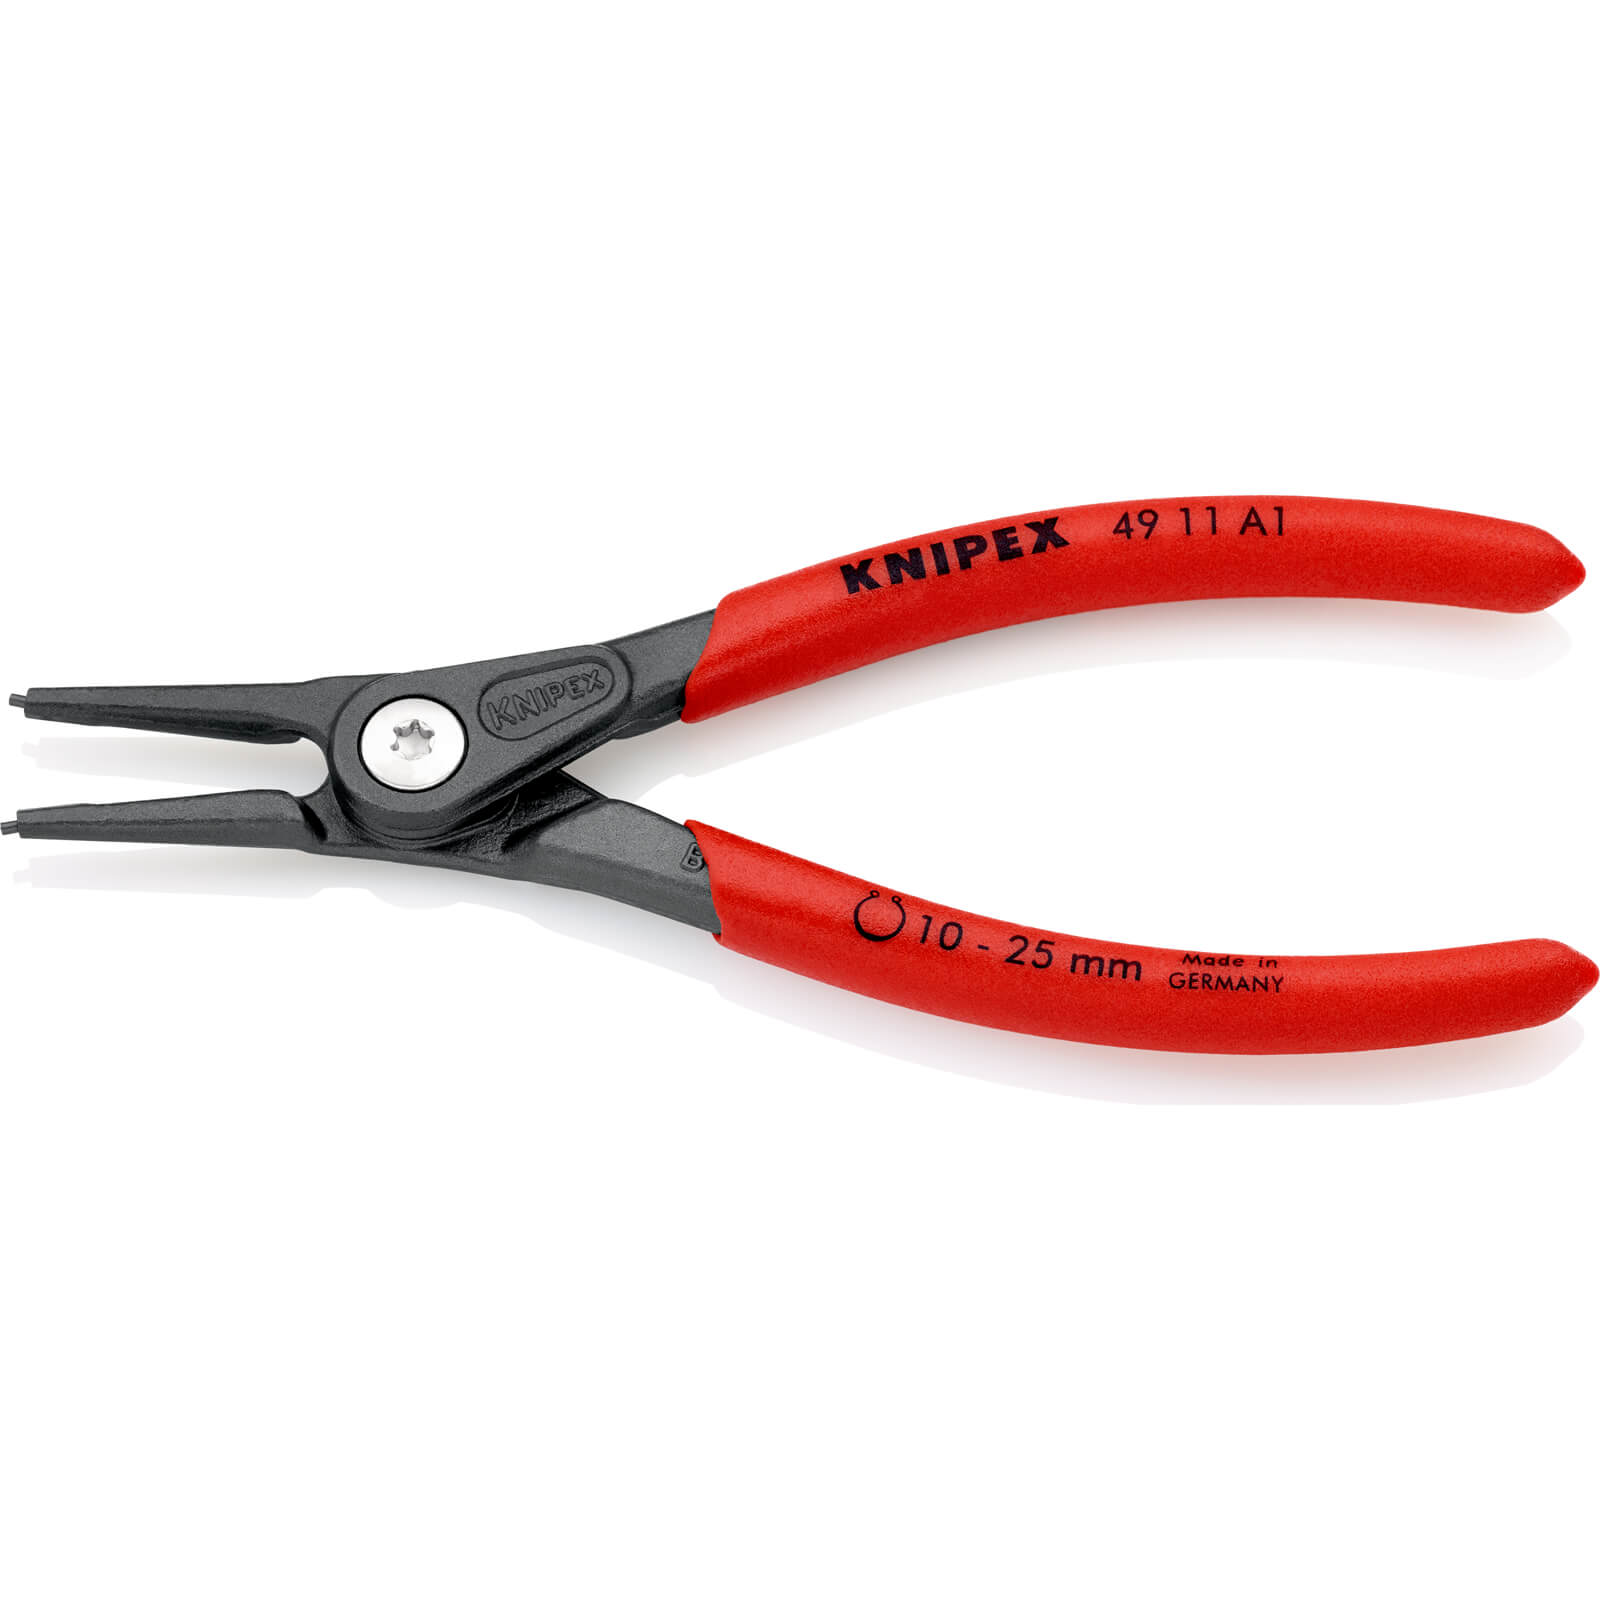 Image of Knipex 49 11 External Straight Precision Circlip Pliers 10mm - 25mm